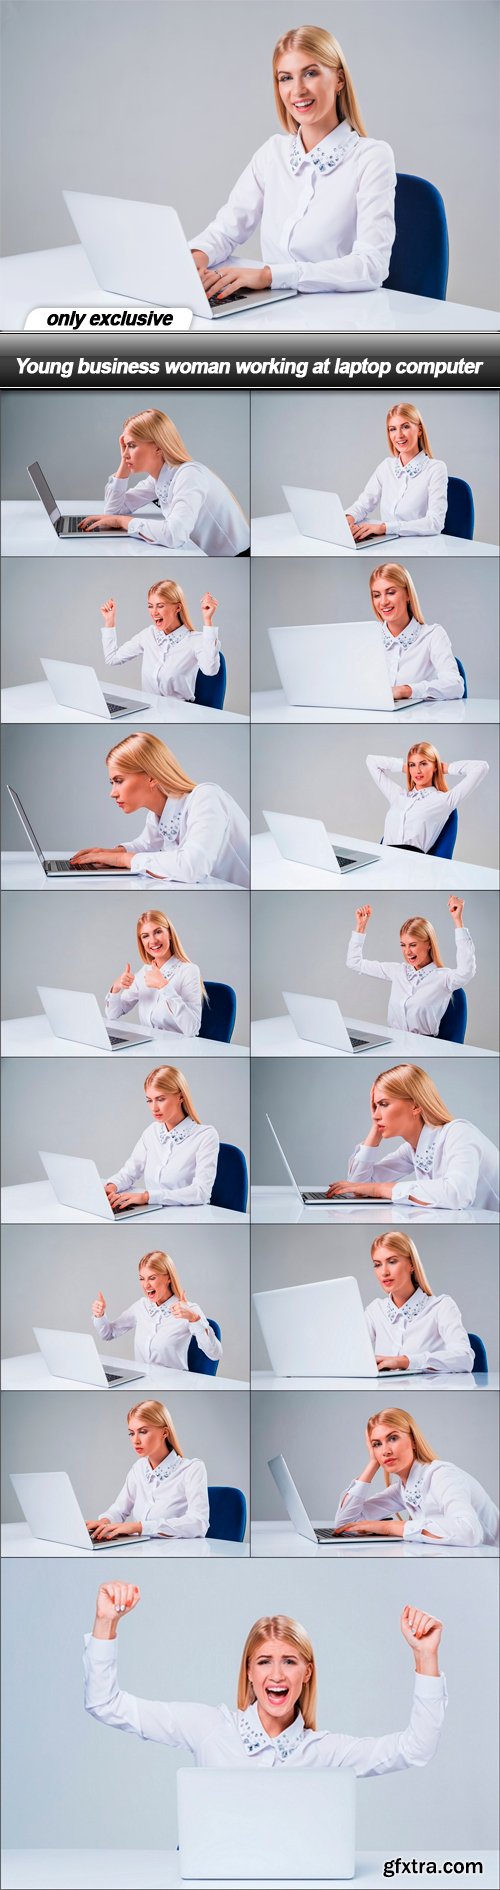 Young business woman working at laptop computer - 15 UHQ JPEG